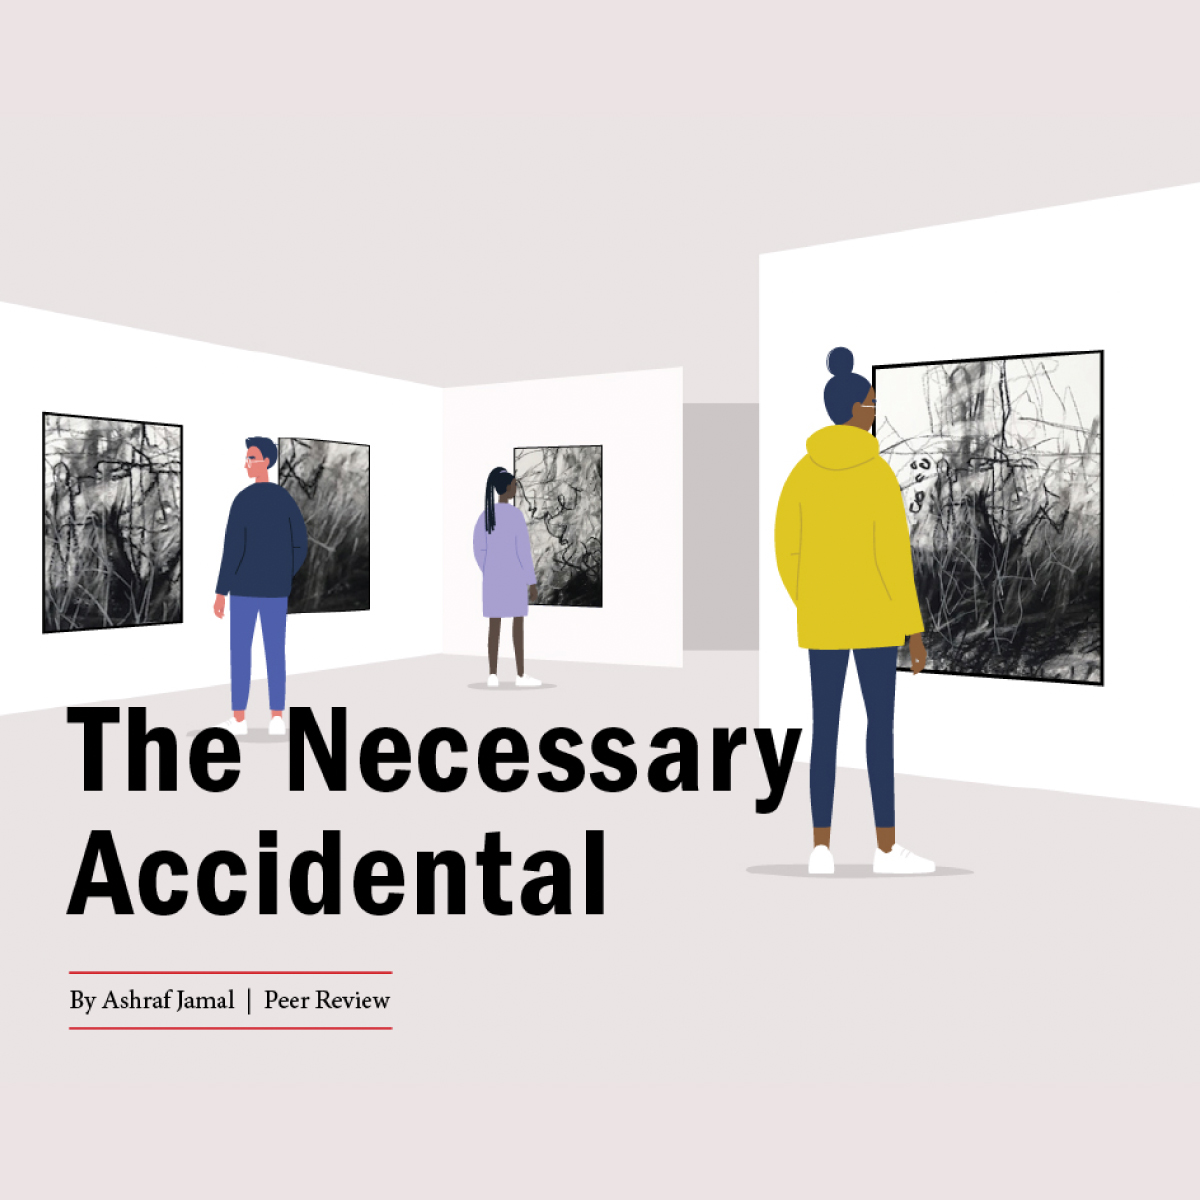 The Necessary Accidental